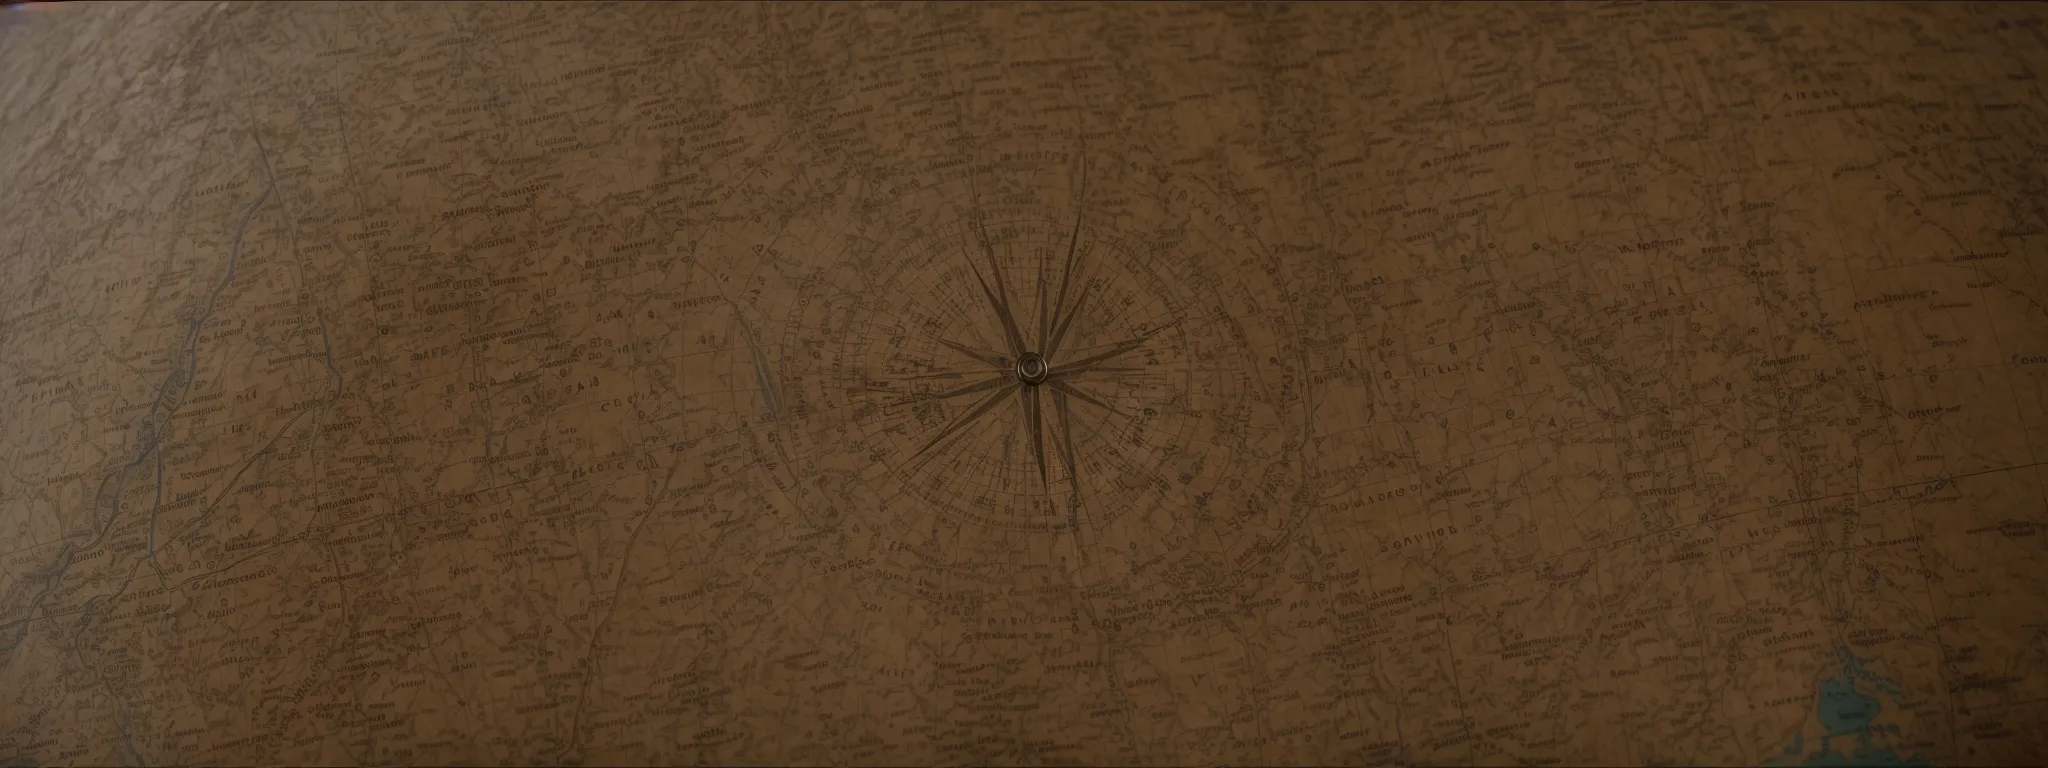 a compass resting on an open, ancient map surrounded by navigation tools.